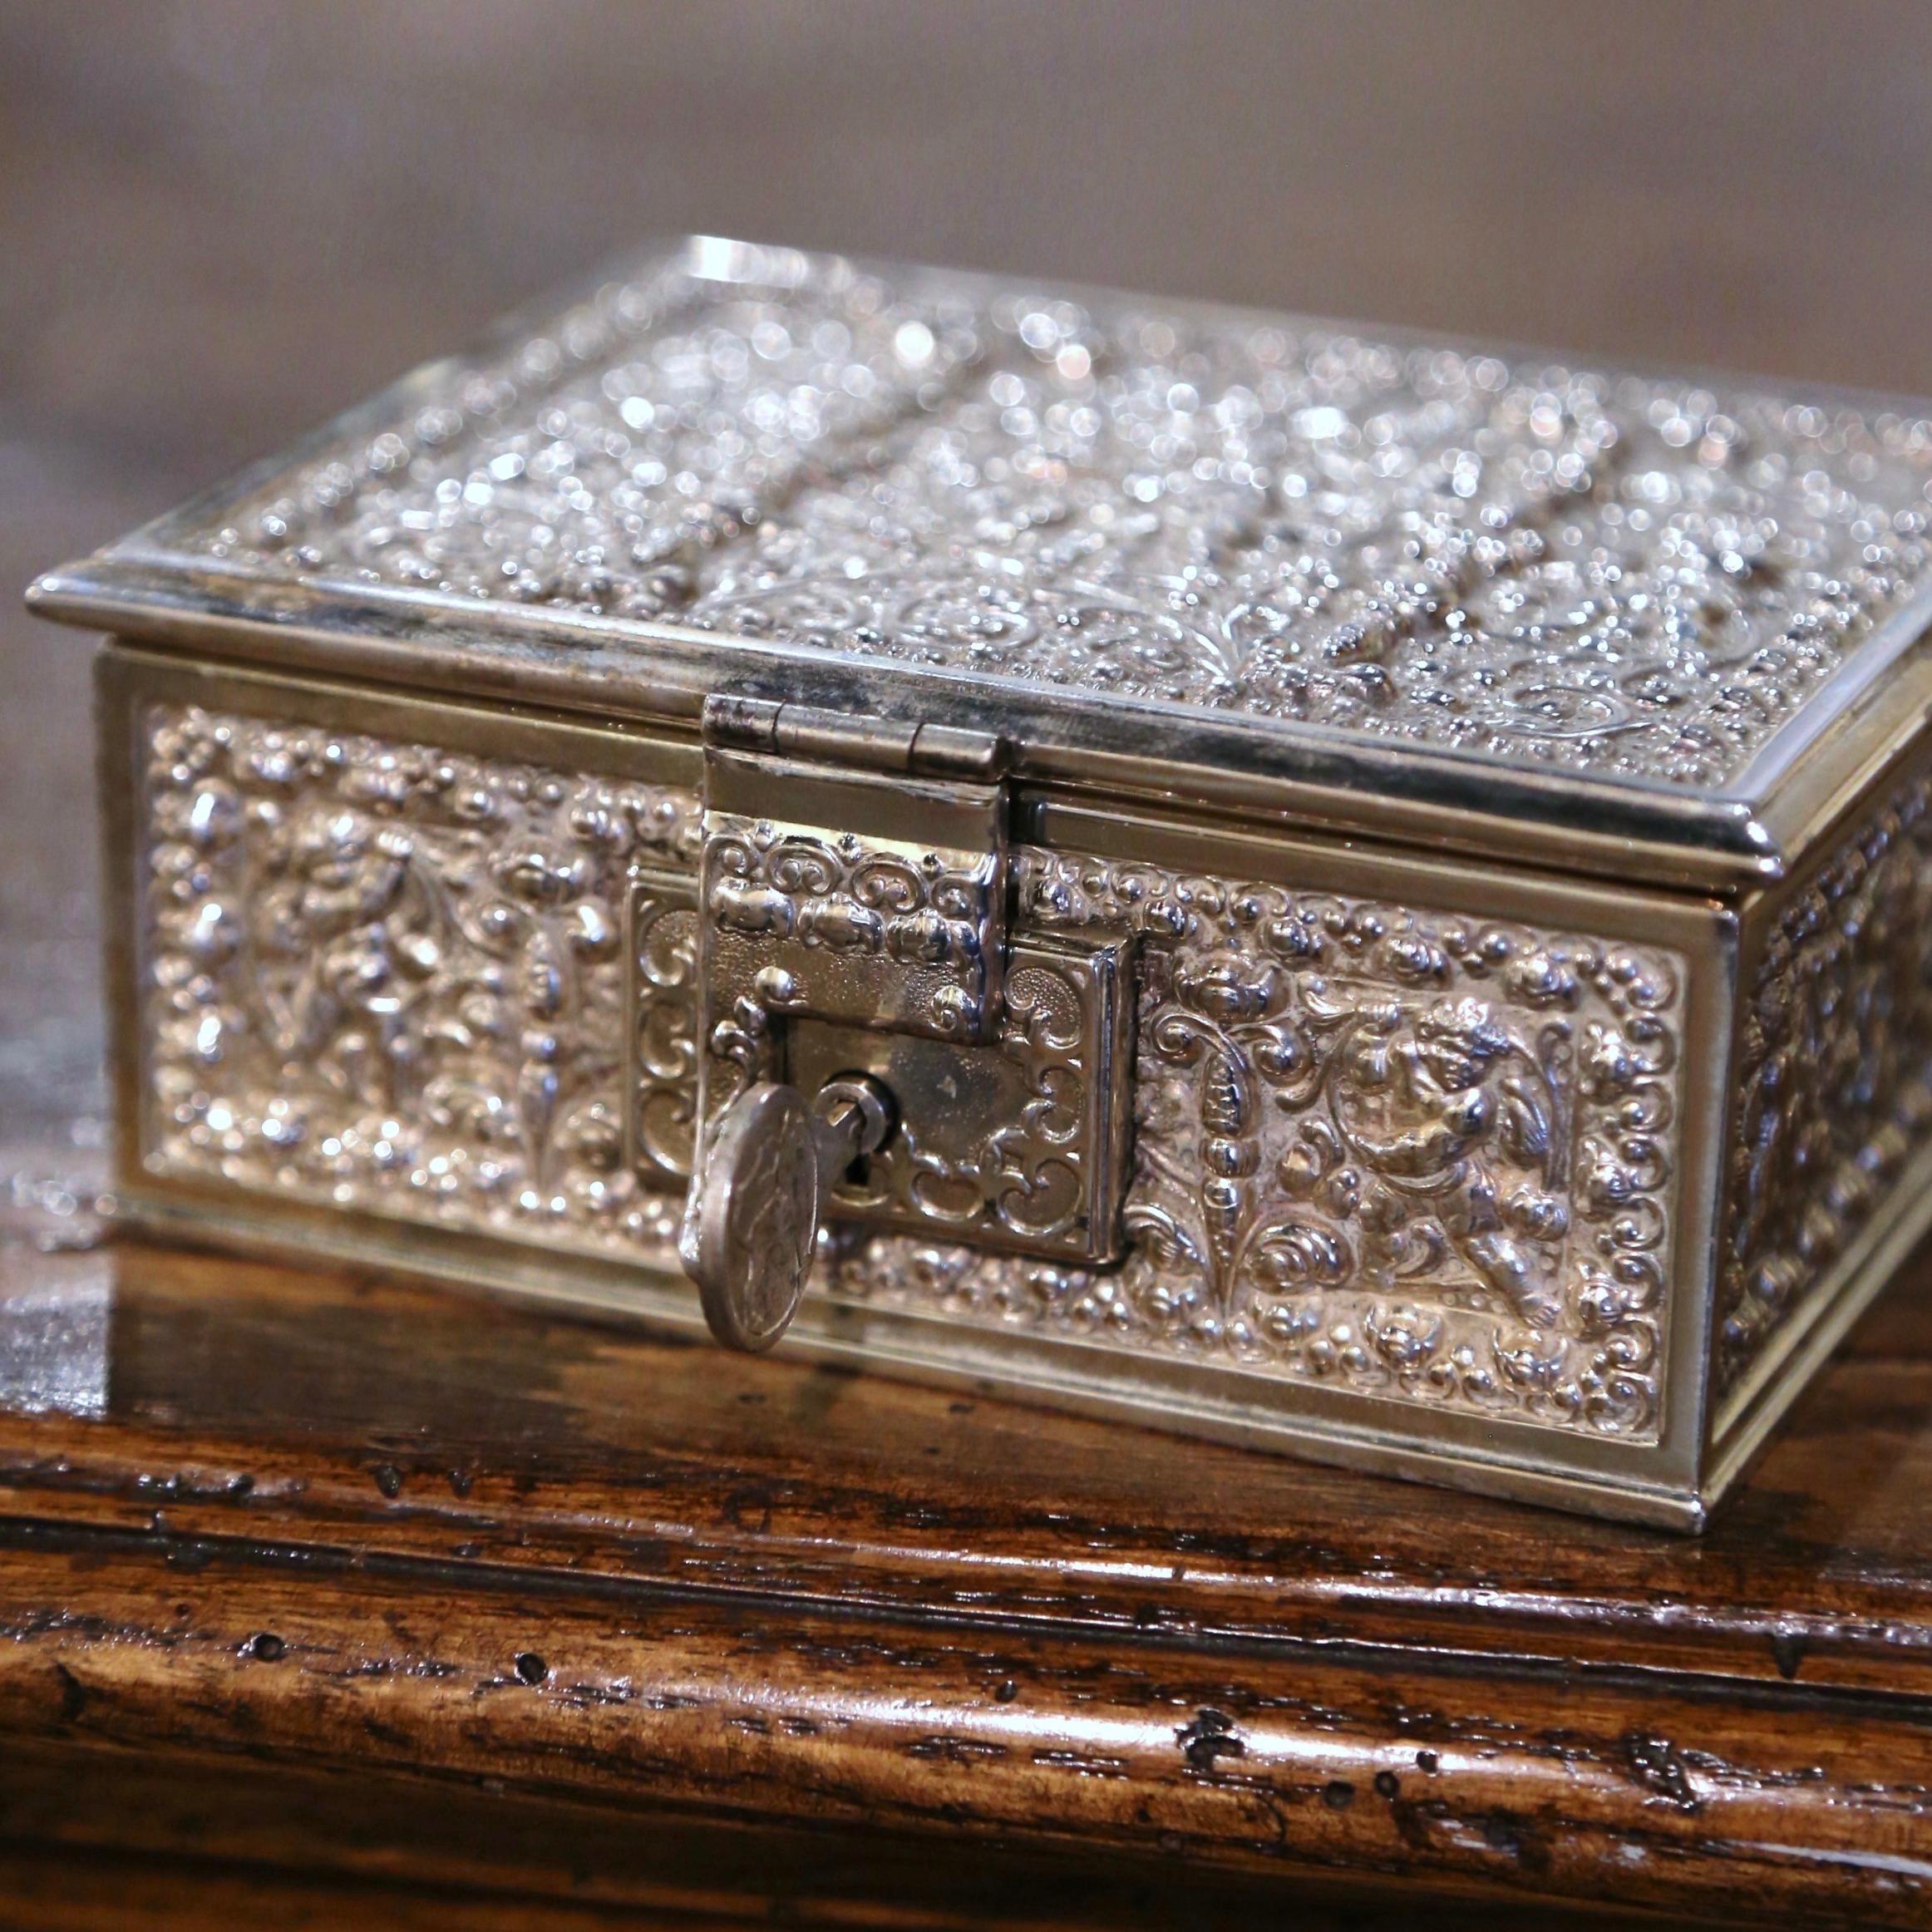 Place this elegant, antique Napoleon III copper box in your master bath to keep your jewelry safe and organized. Crafted in France circa 1880, the ornate casket is almost square in shape; all five sides including the top are decorated with detailed